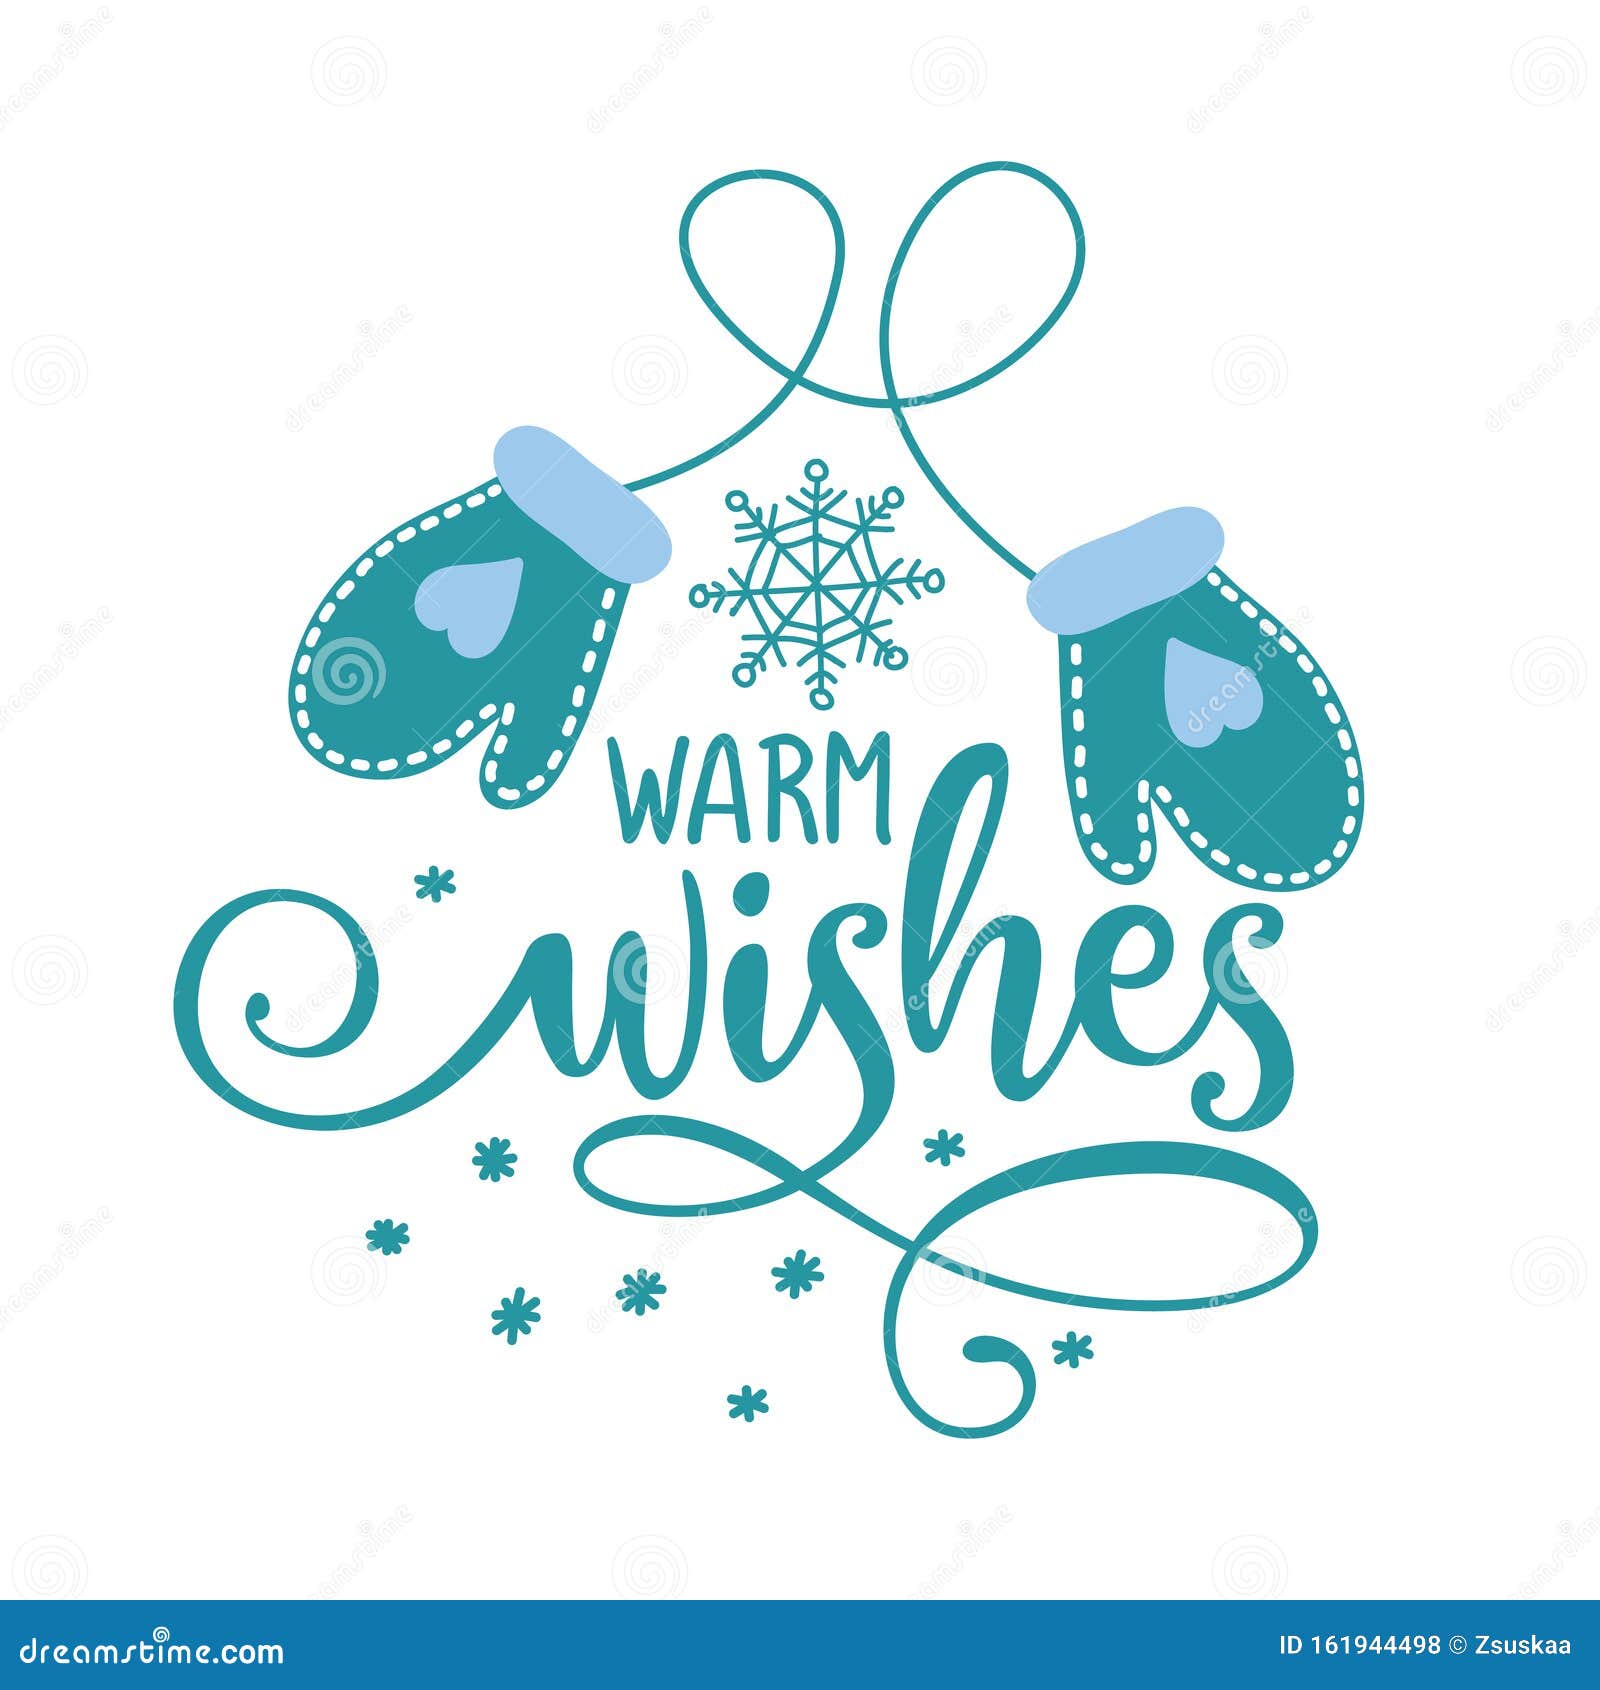 warm wishes - winter romantic lettering with gloves.